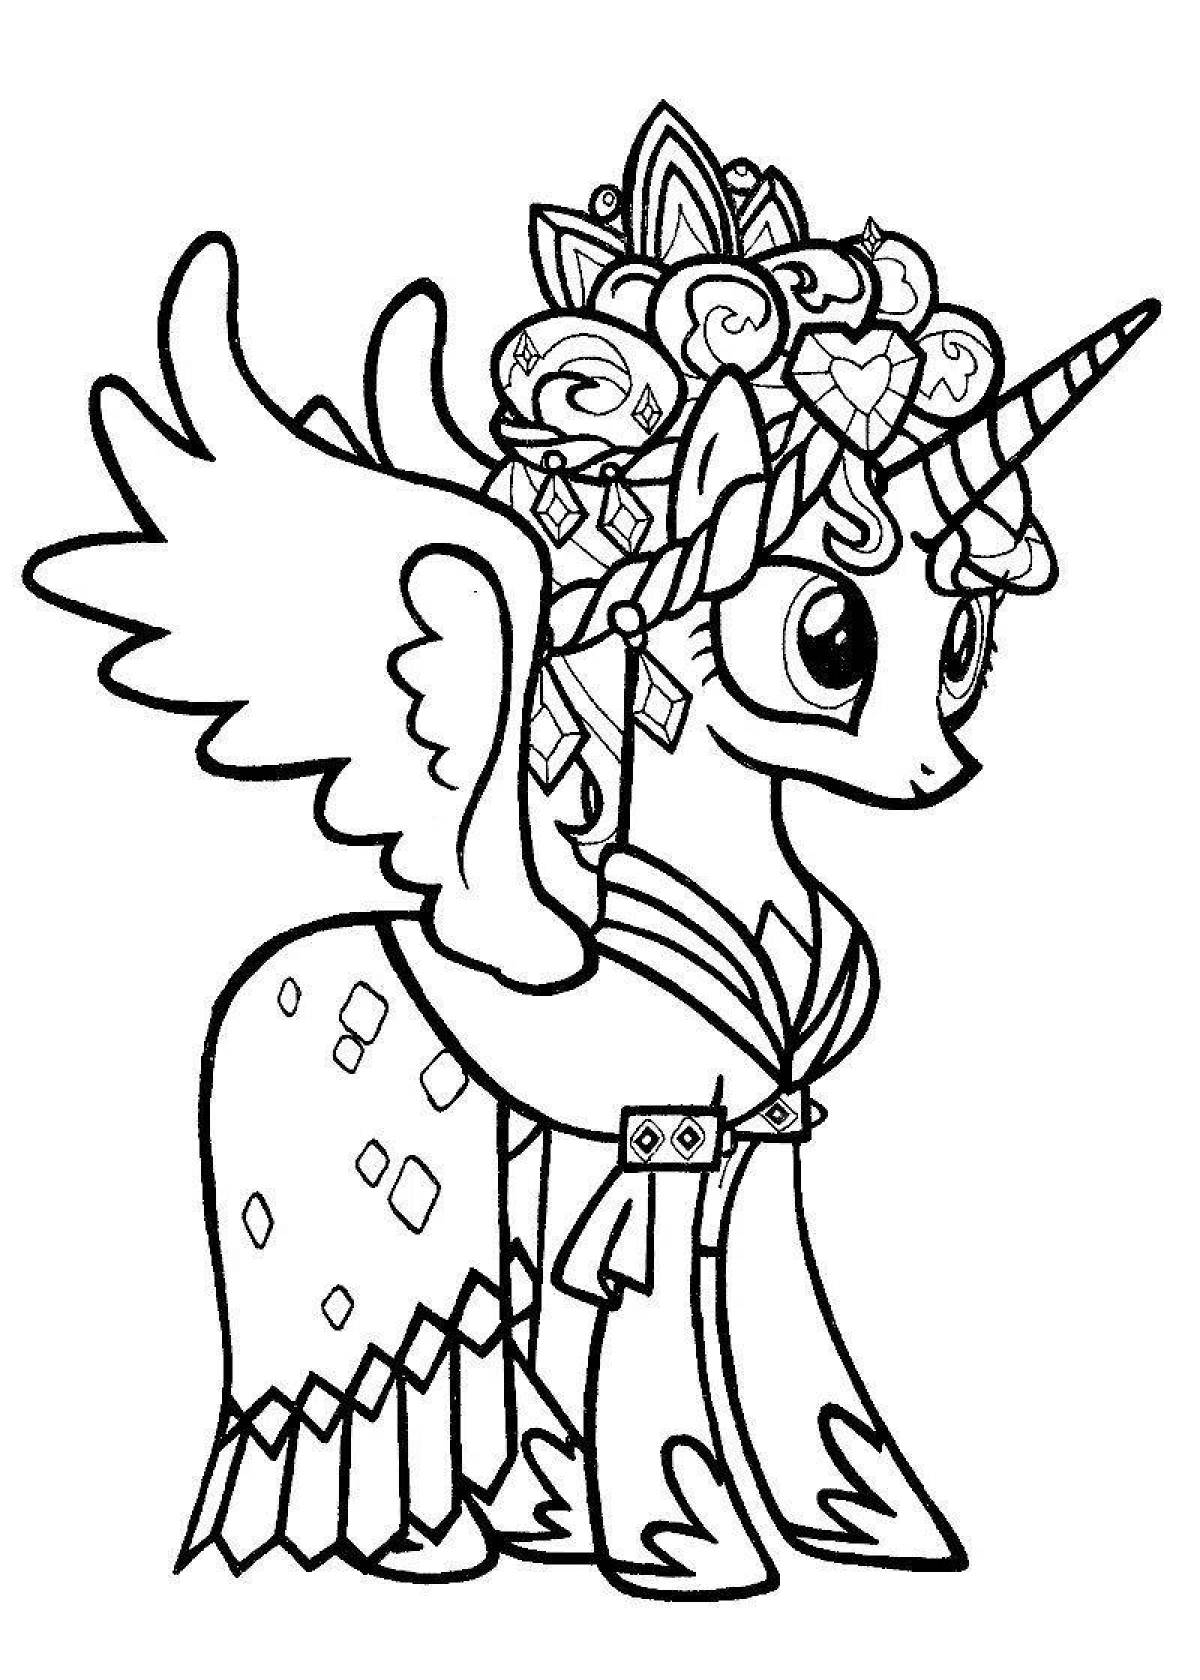 Delightful coloring my little pony cadence